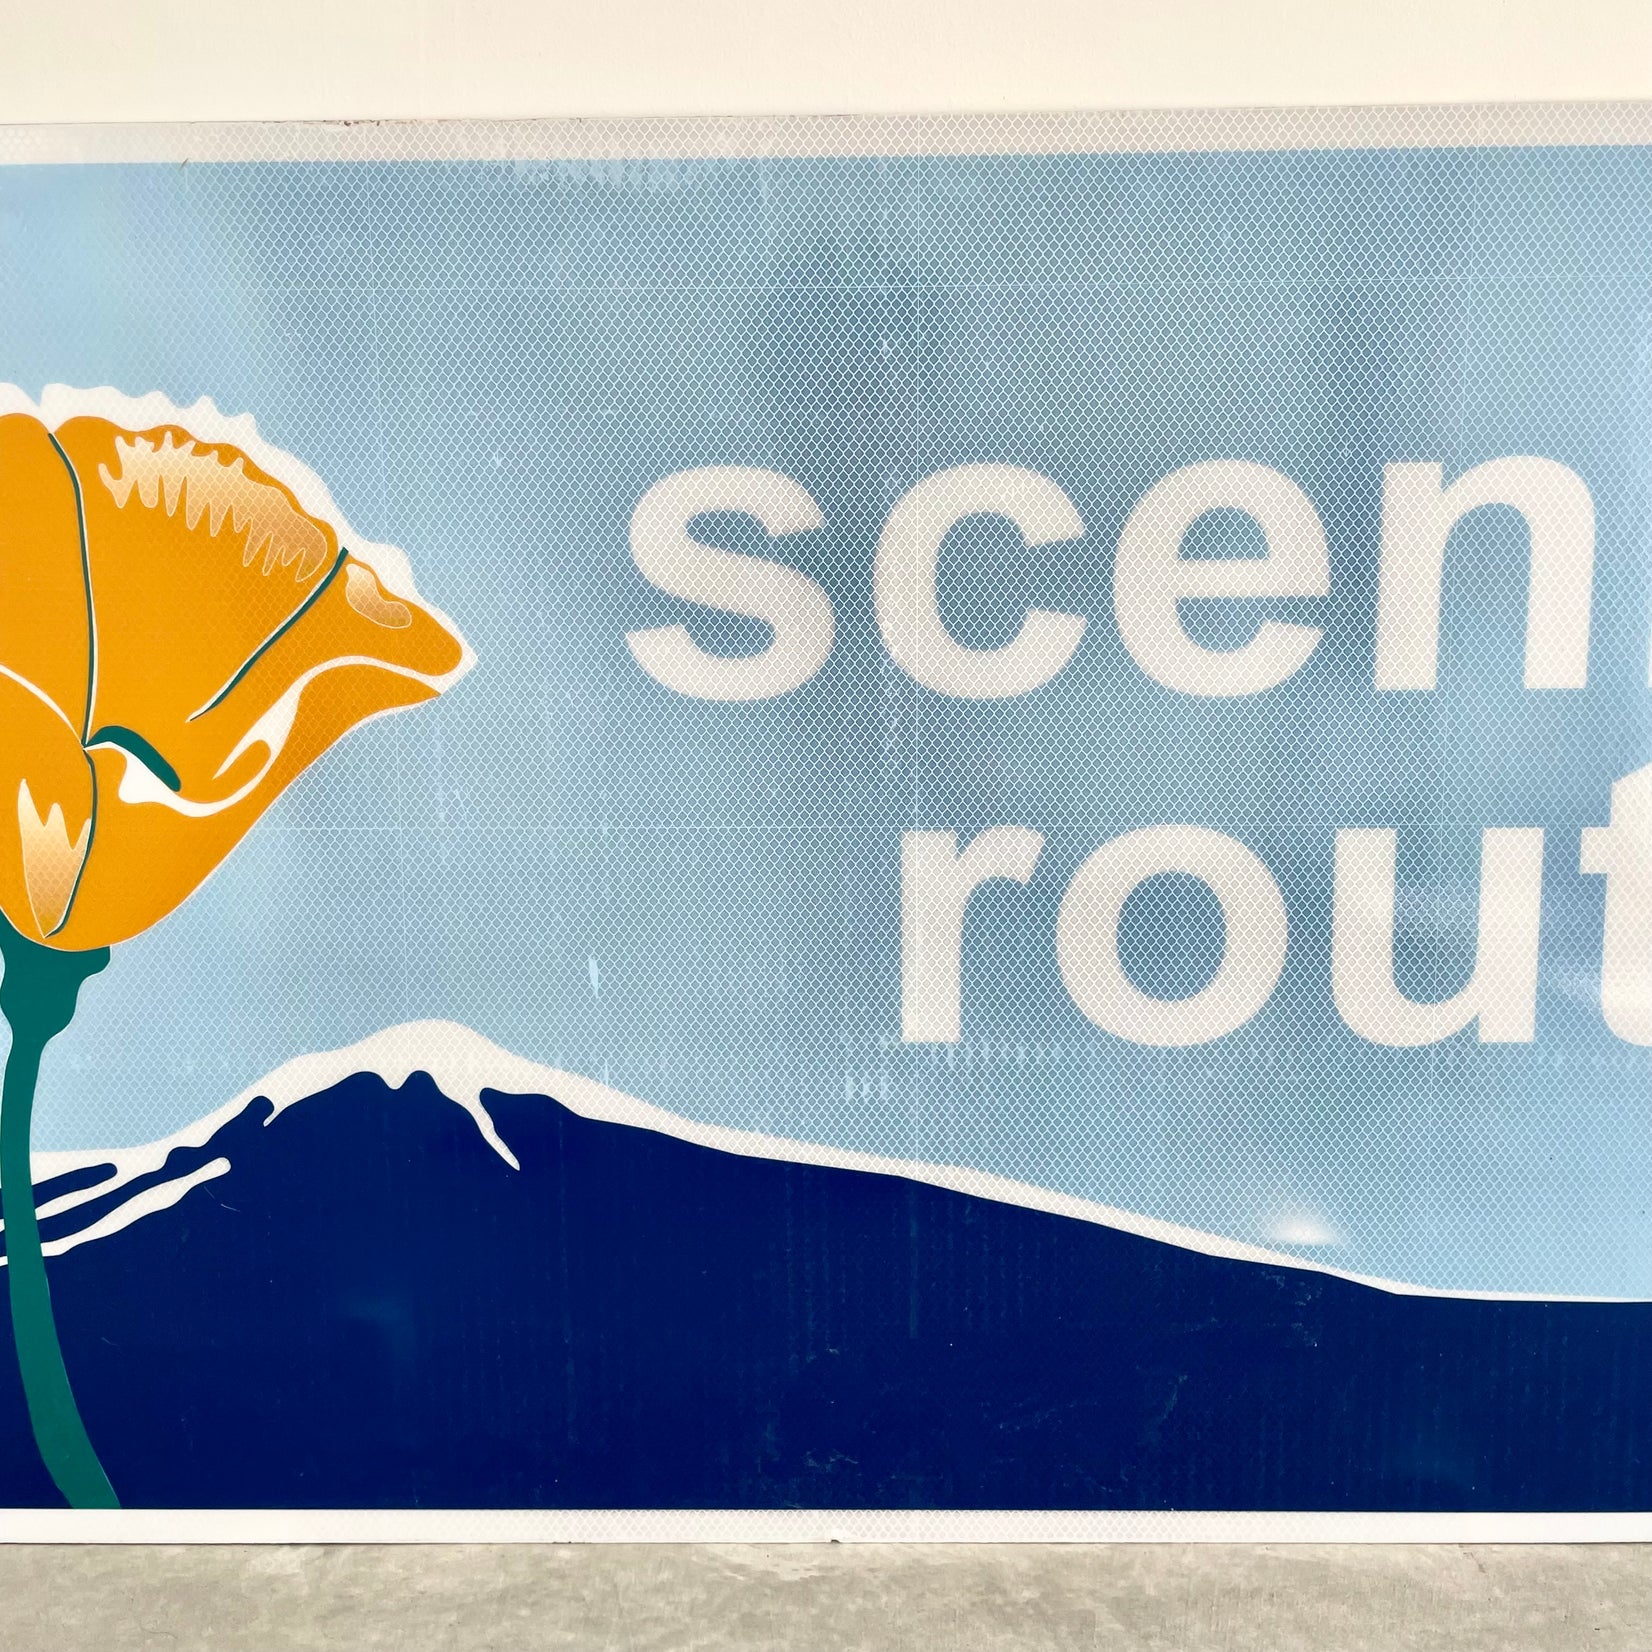 'Scenic Route' California Highway Sign, USA